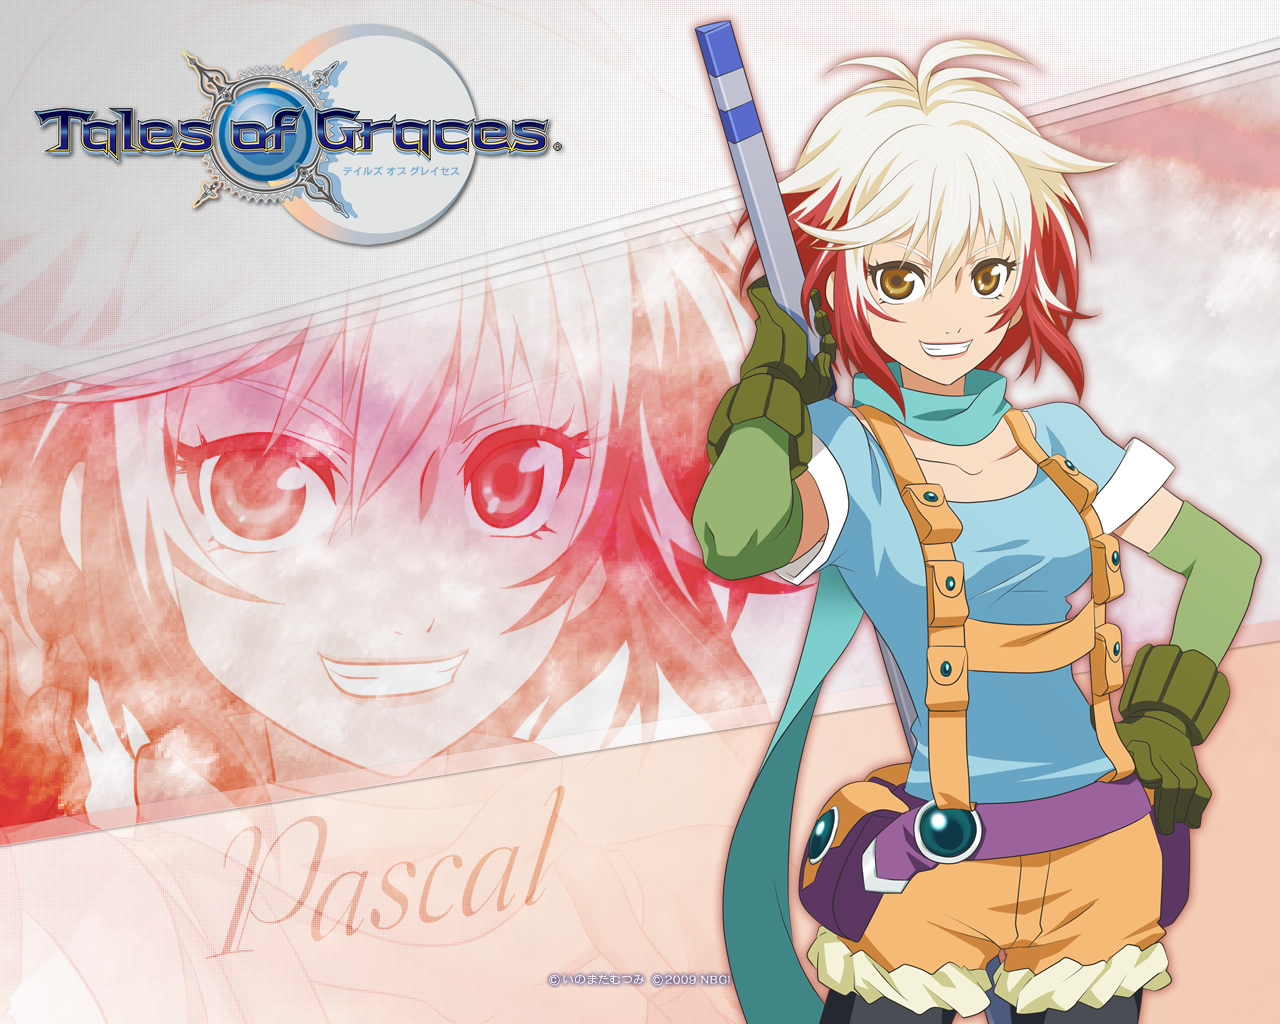 Pascal Official Wall 1280x1024
